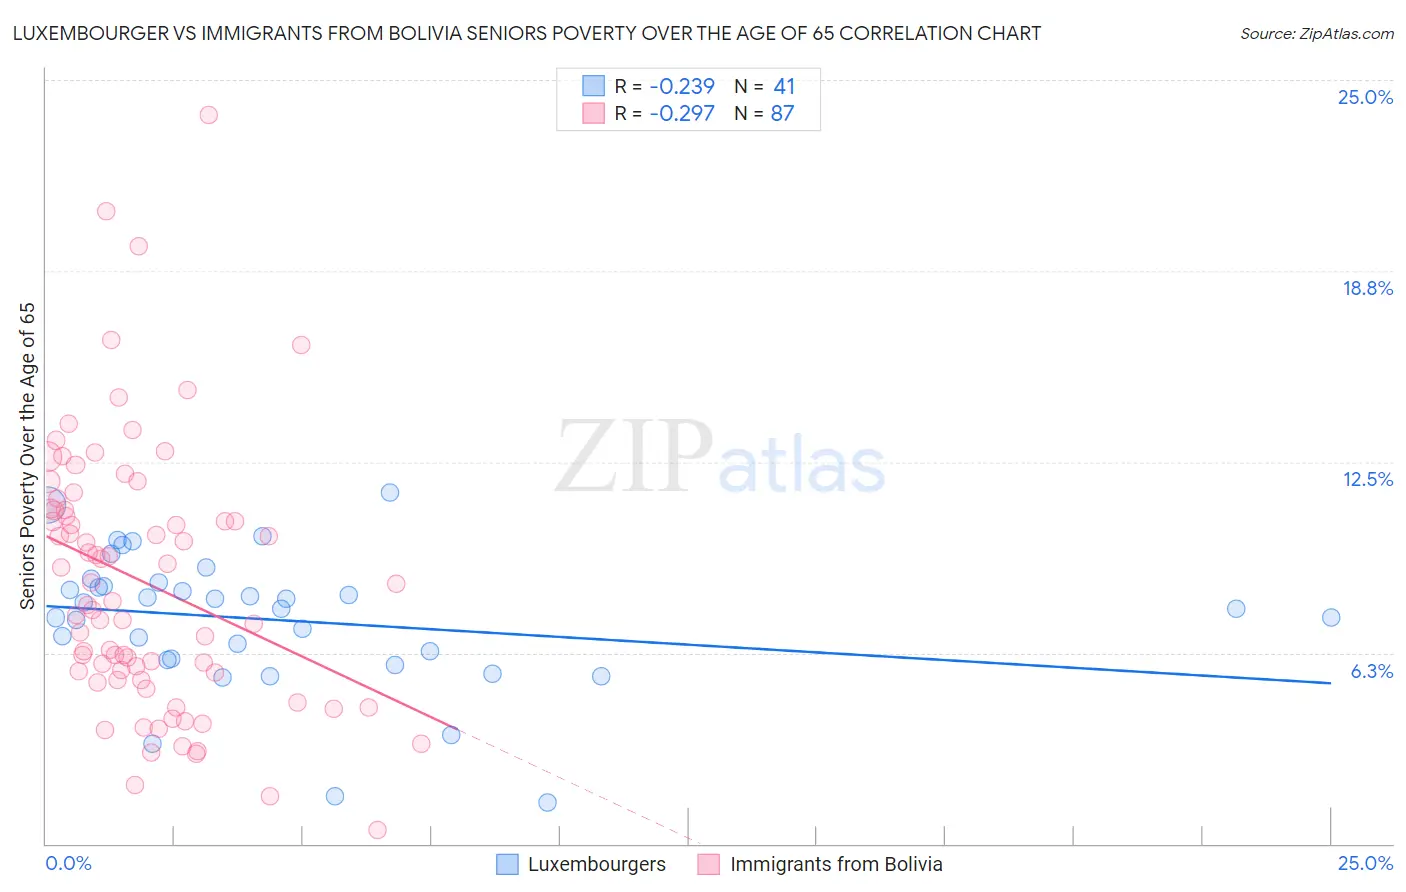 Luxembourger vs Immigrants from Bolivia Seniors Poverty Over the Age of 65